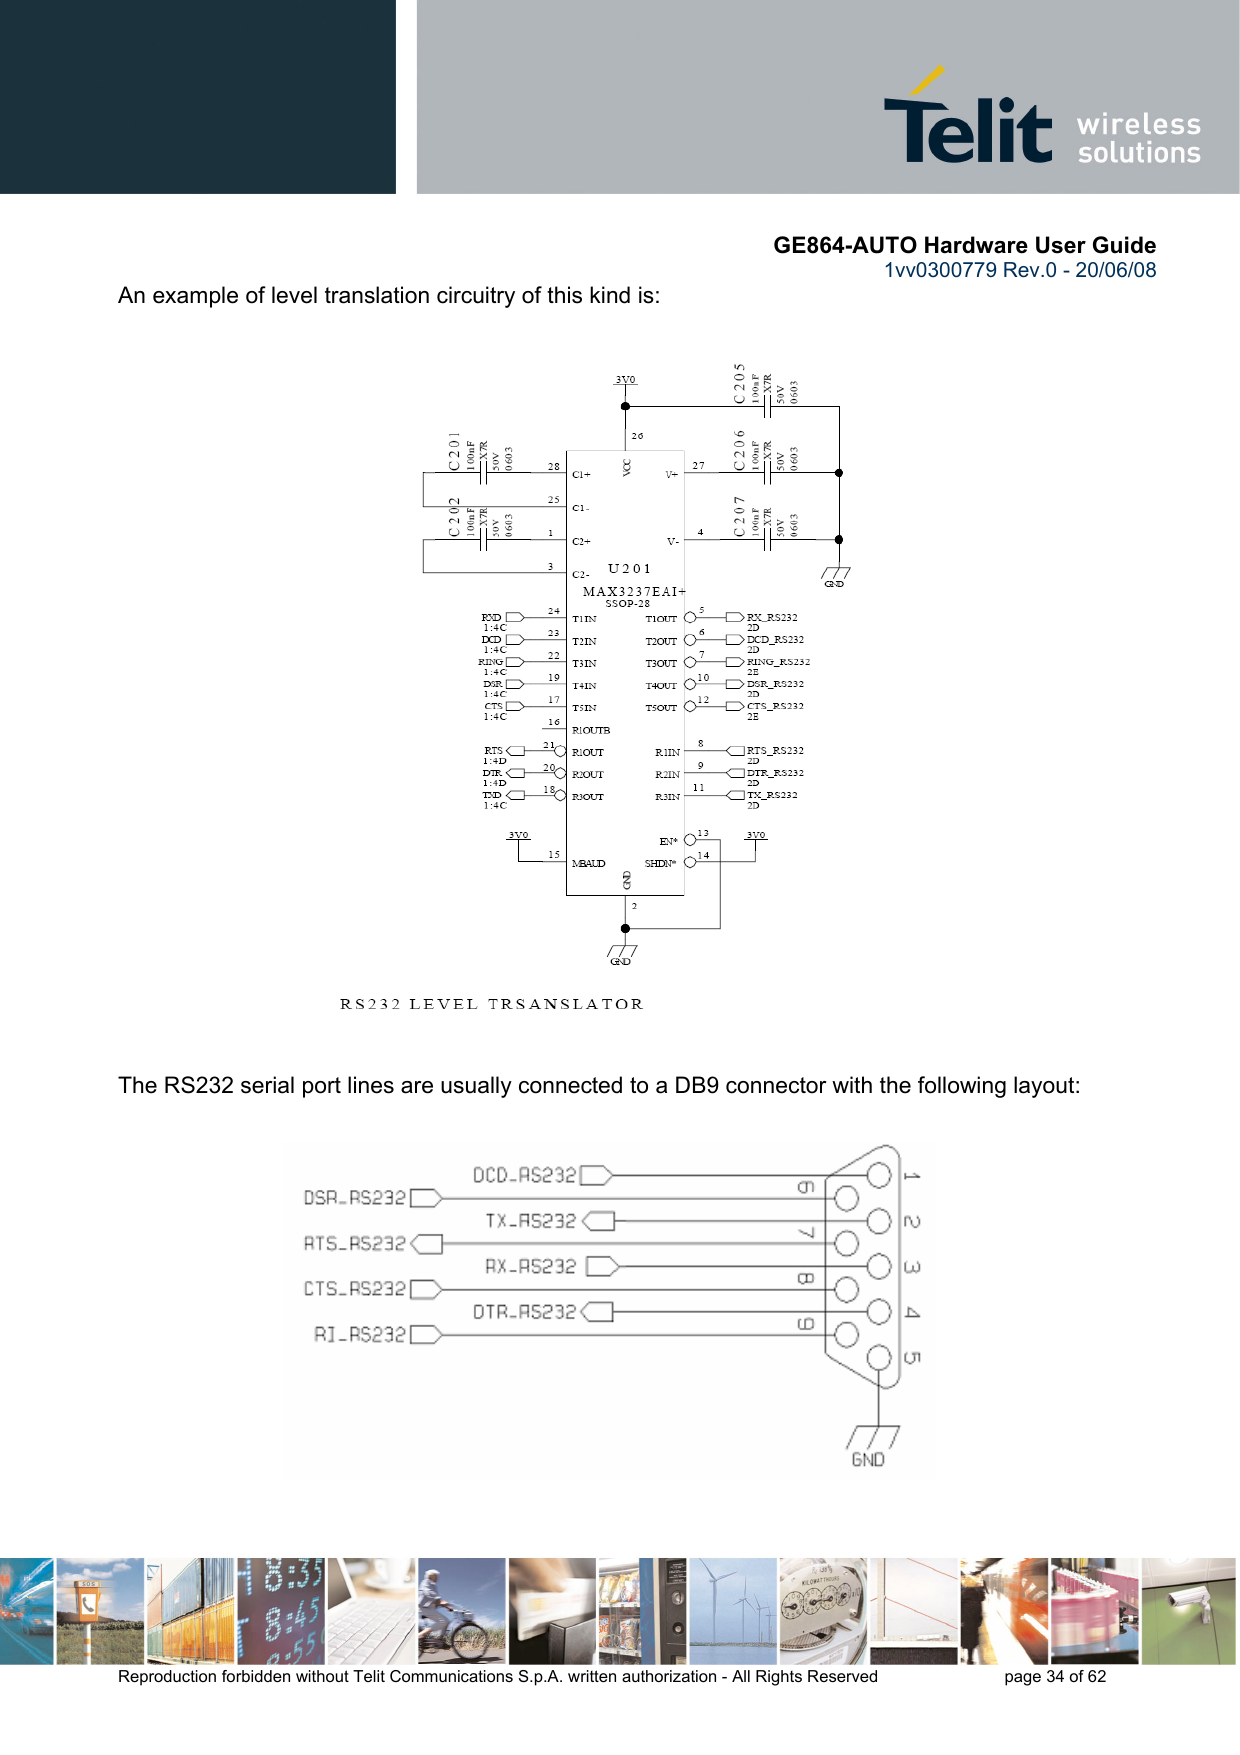       GE864-AUTO Hardware User Guide 1vv0300779 Rev.0 - 20/06/08      Reproduction forbidden without Telit Communications S.p.A. written authorization - All Rights Reserved    page 34 of 62  An example of level translation circuitry of this kind is:                              The RS232 serial port lines are usually connected to a DB9 connector with the following layout:  